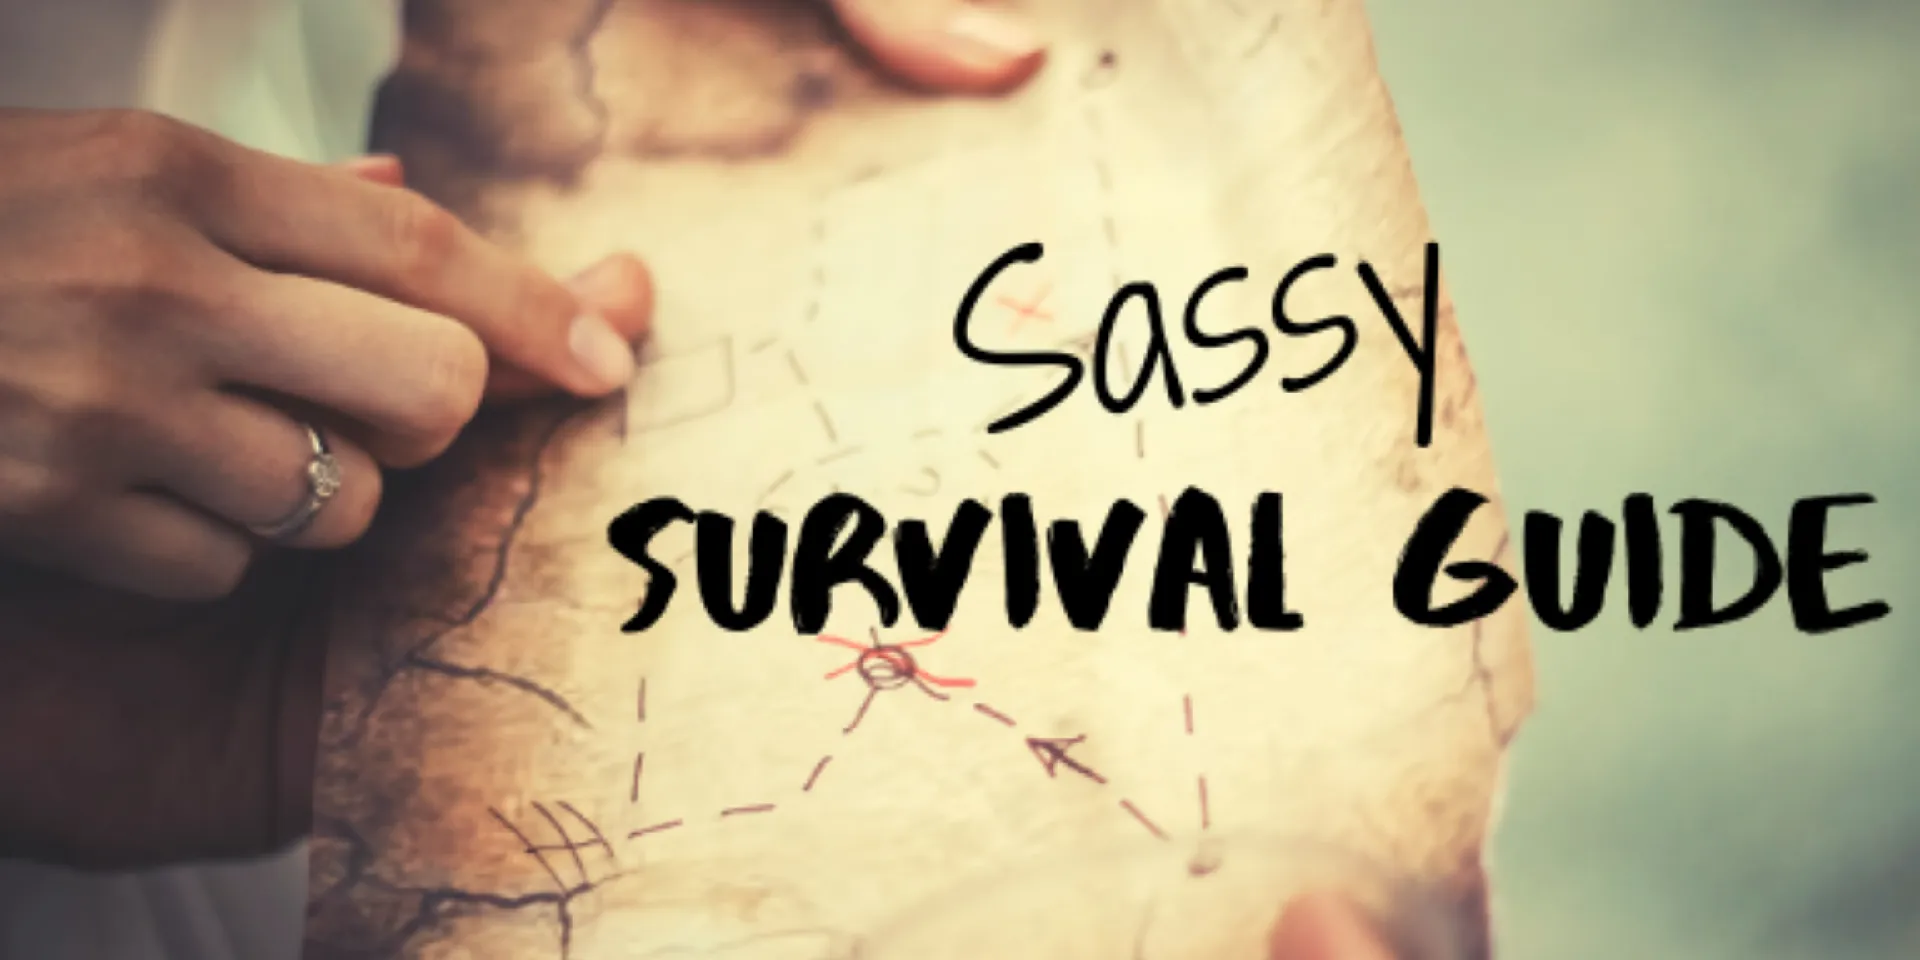 Sassy Survival Guide